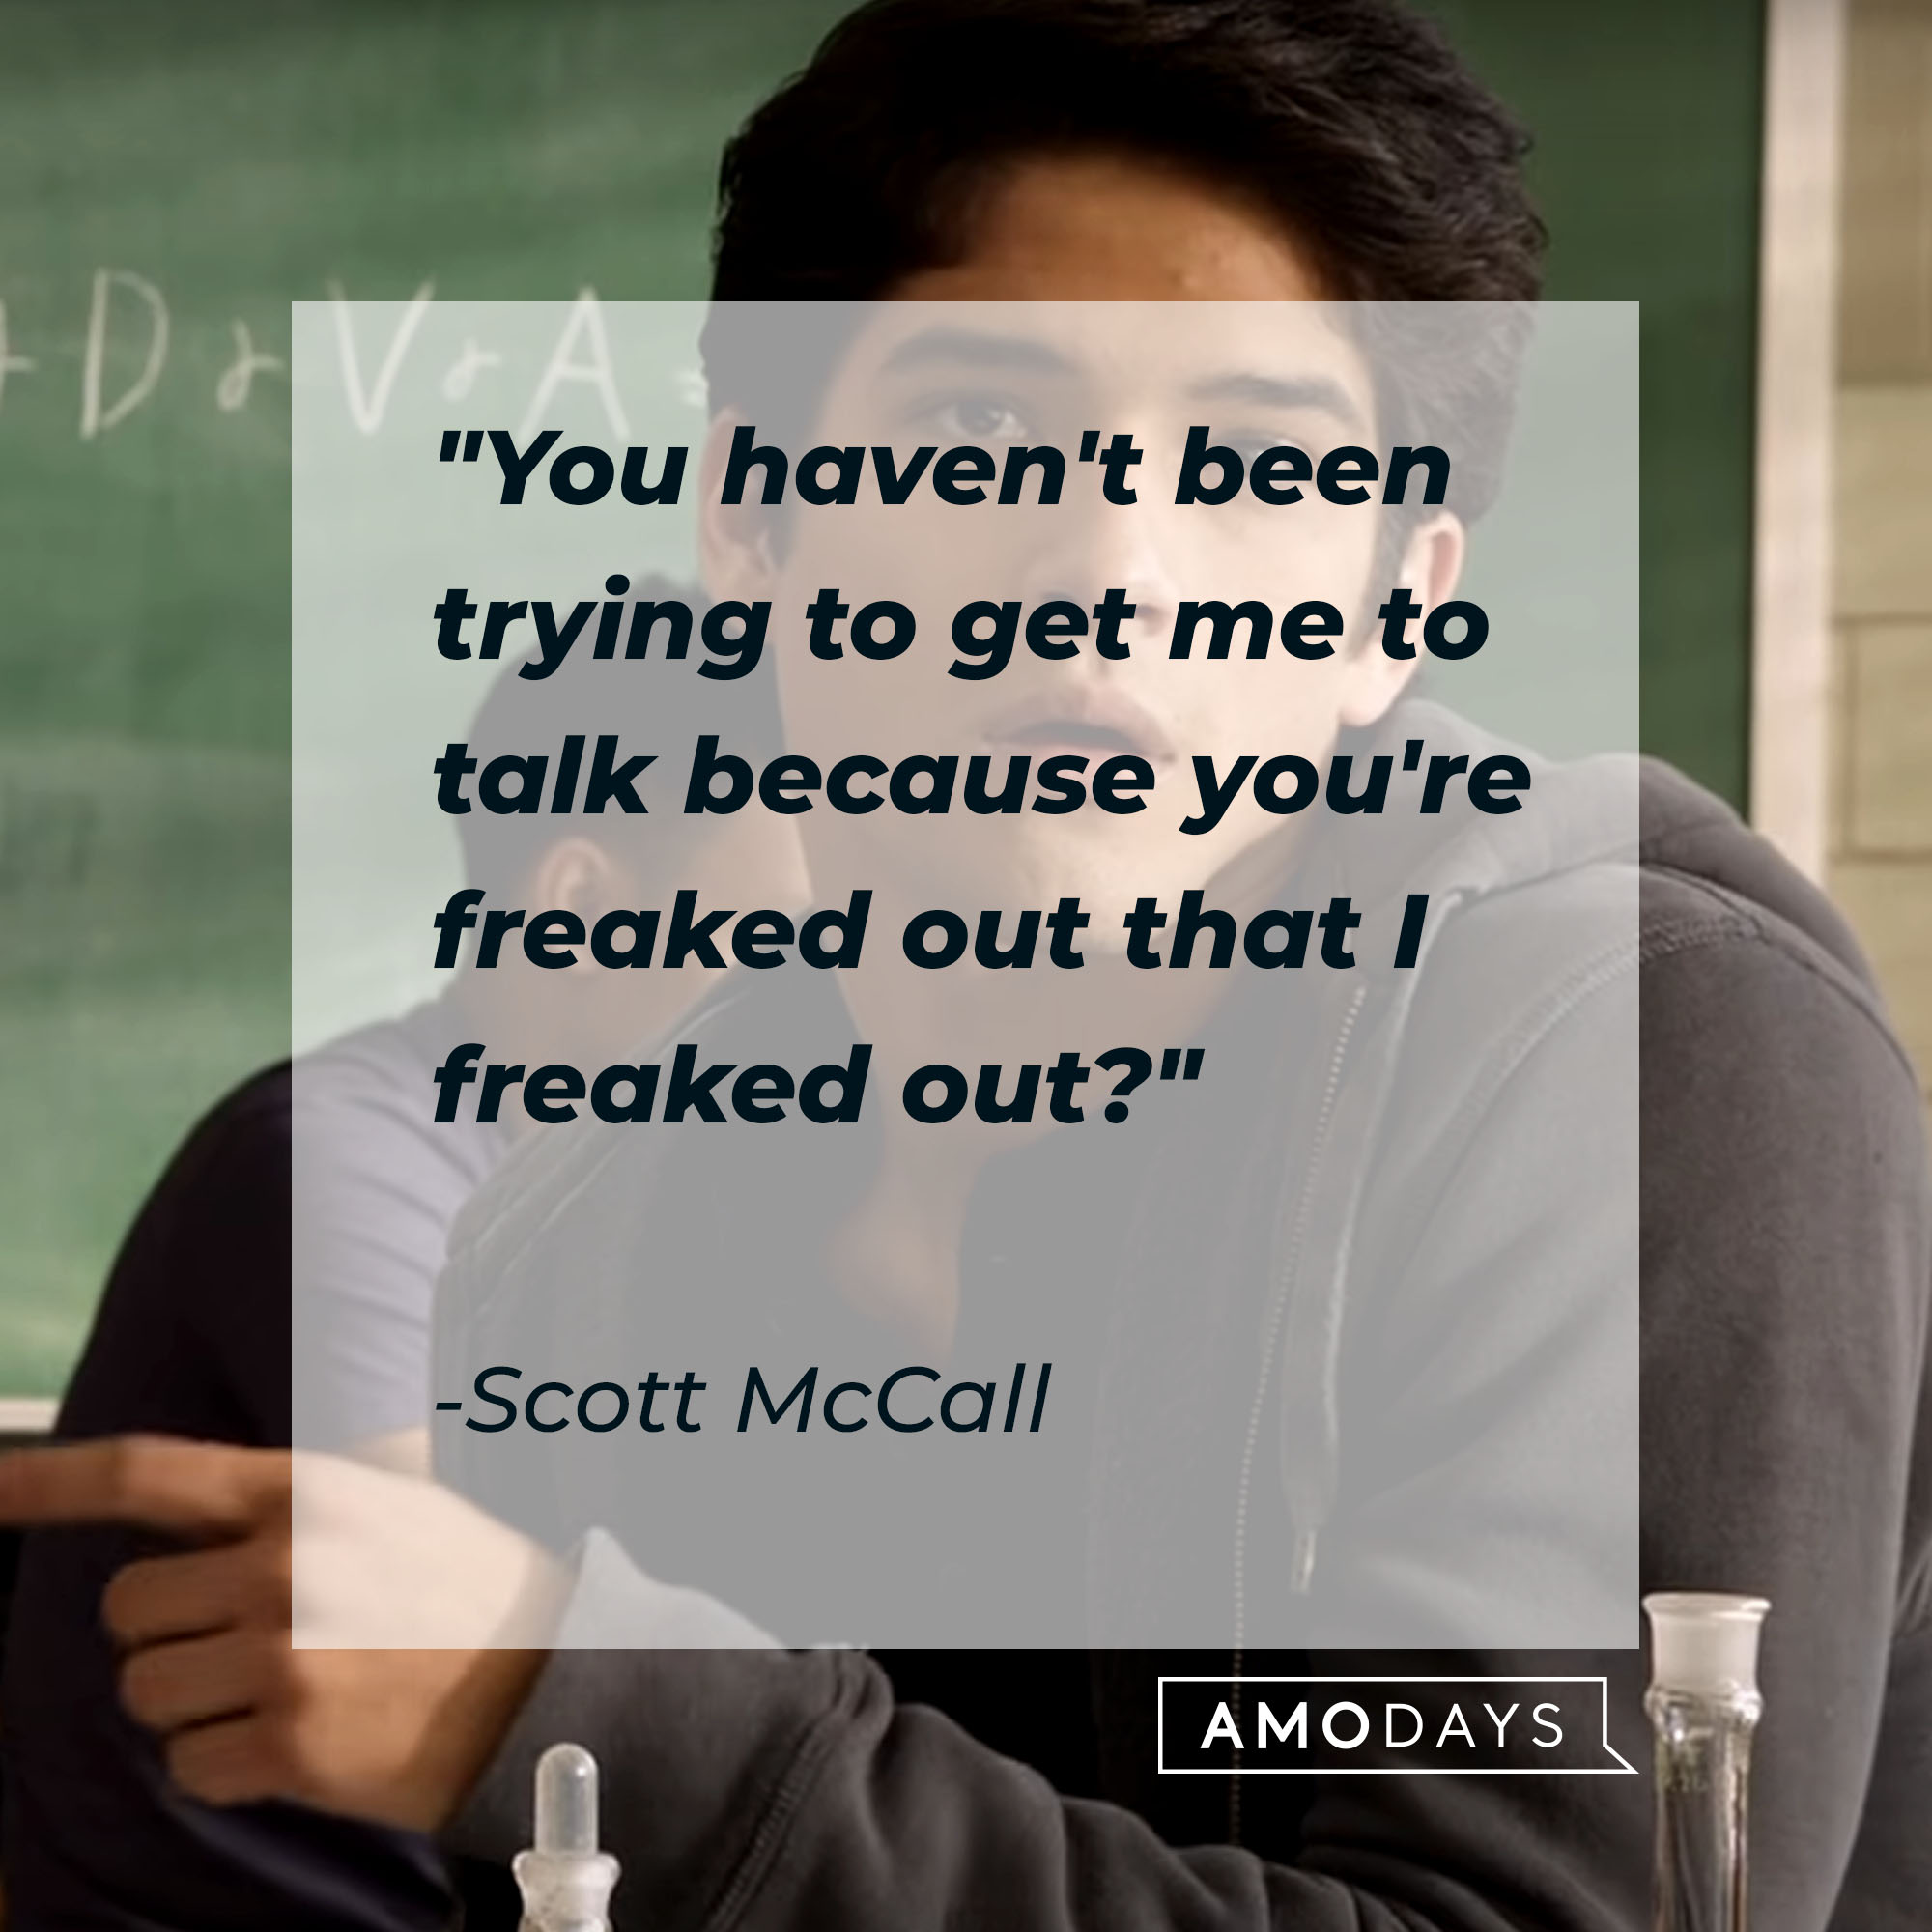 Scott McCall's quote: "You haven't been trying to get me to talk because you're freaked out that I freaked out?" | Source: Youtube.com/WolfWatch